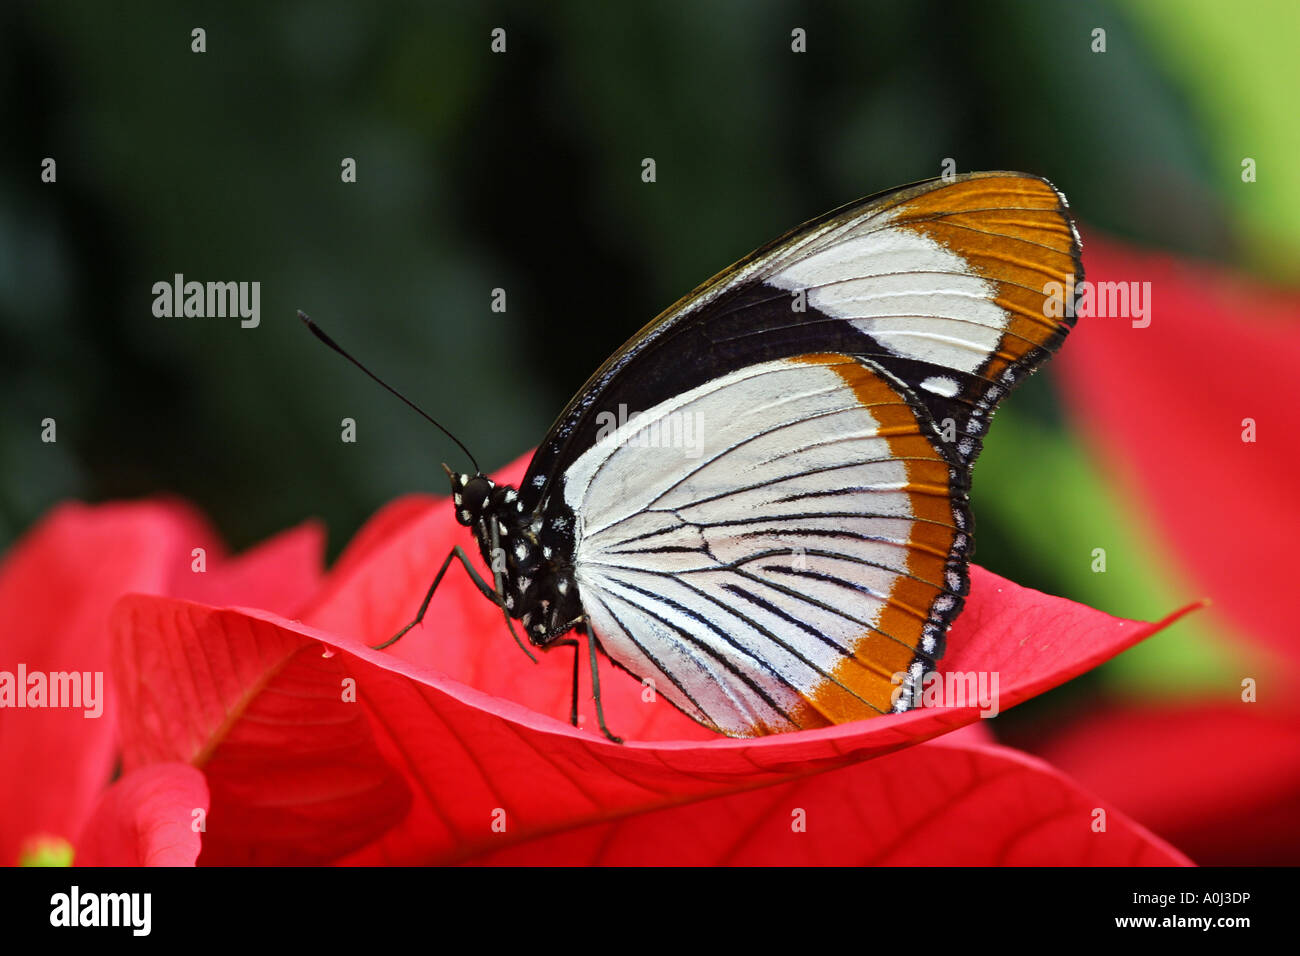 Tropical butterfly Red-spotted Diadem Hypolimnas usumbara, Asia, on top of the blossom of a Poinsettia Euphorbia pulcherrima Stock Photo